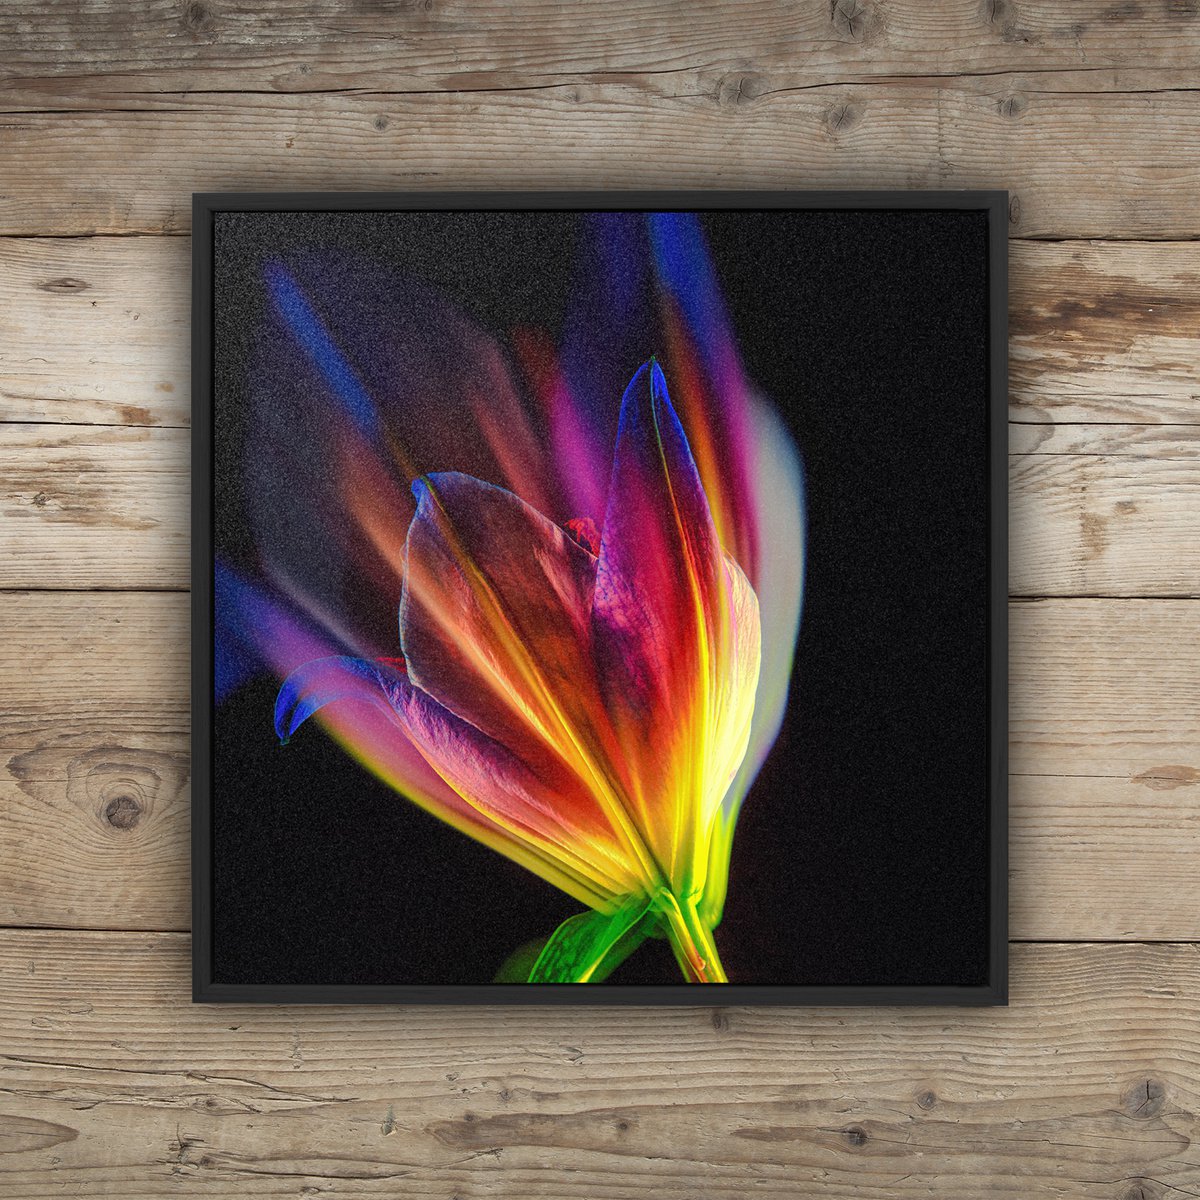 Lilies #3 Abstract Multiple Exposure Photography of Dyed Lilies Limited Edition Framed Pri... by Graham Briggs